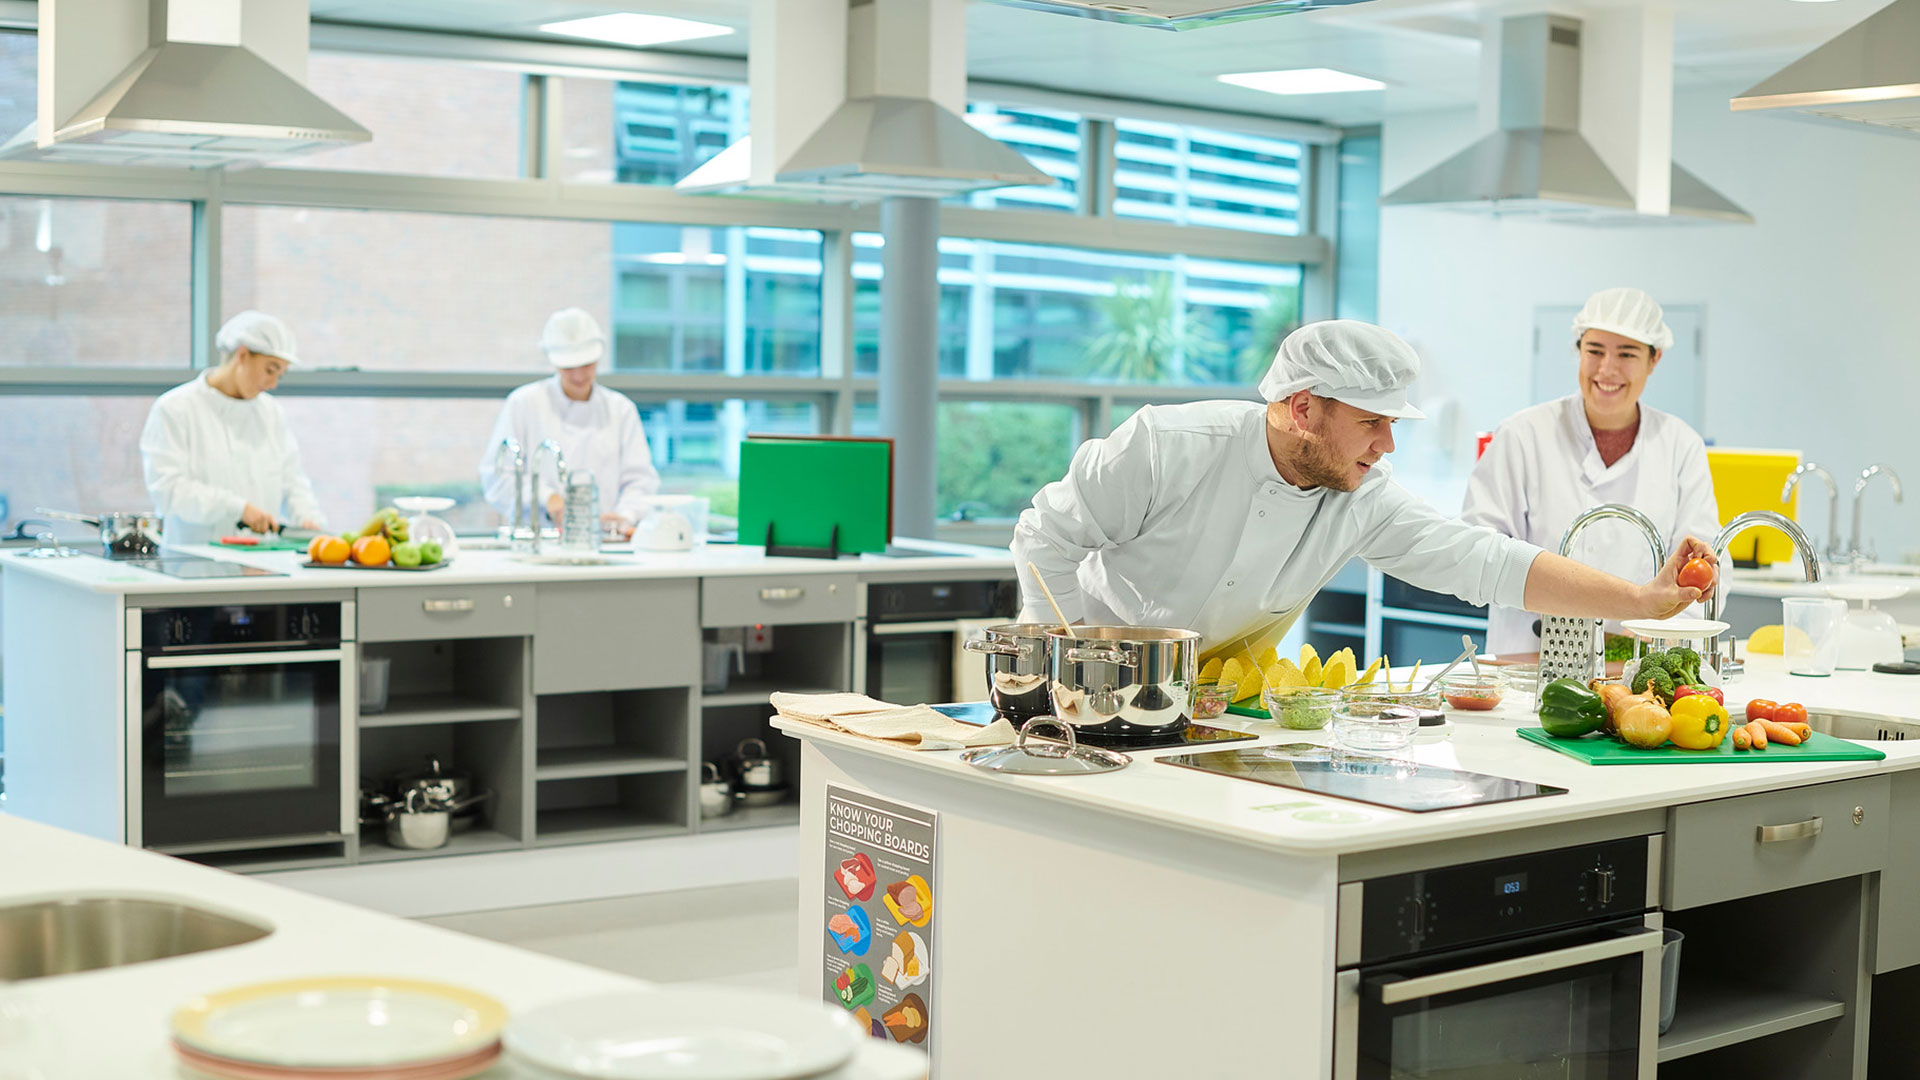 Students in the Nutrition labs in the Faculty of Health, Social Care and Medicine. They are wearing their lab clothing and working with food.